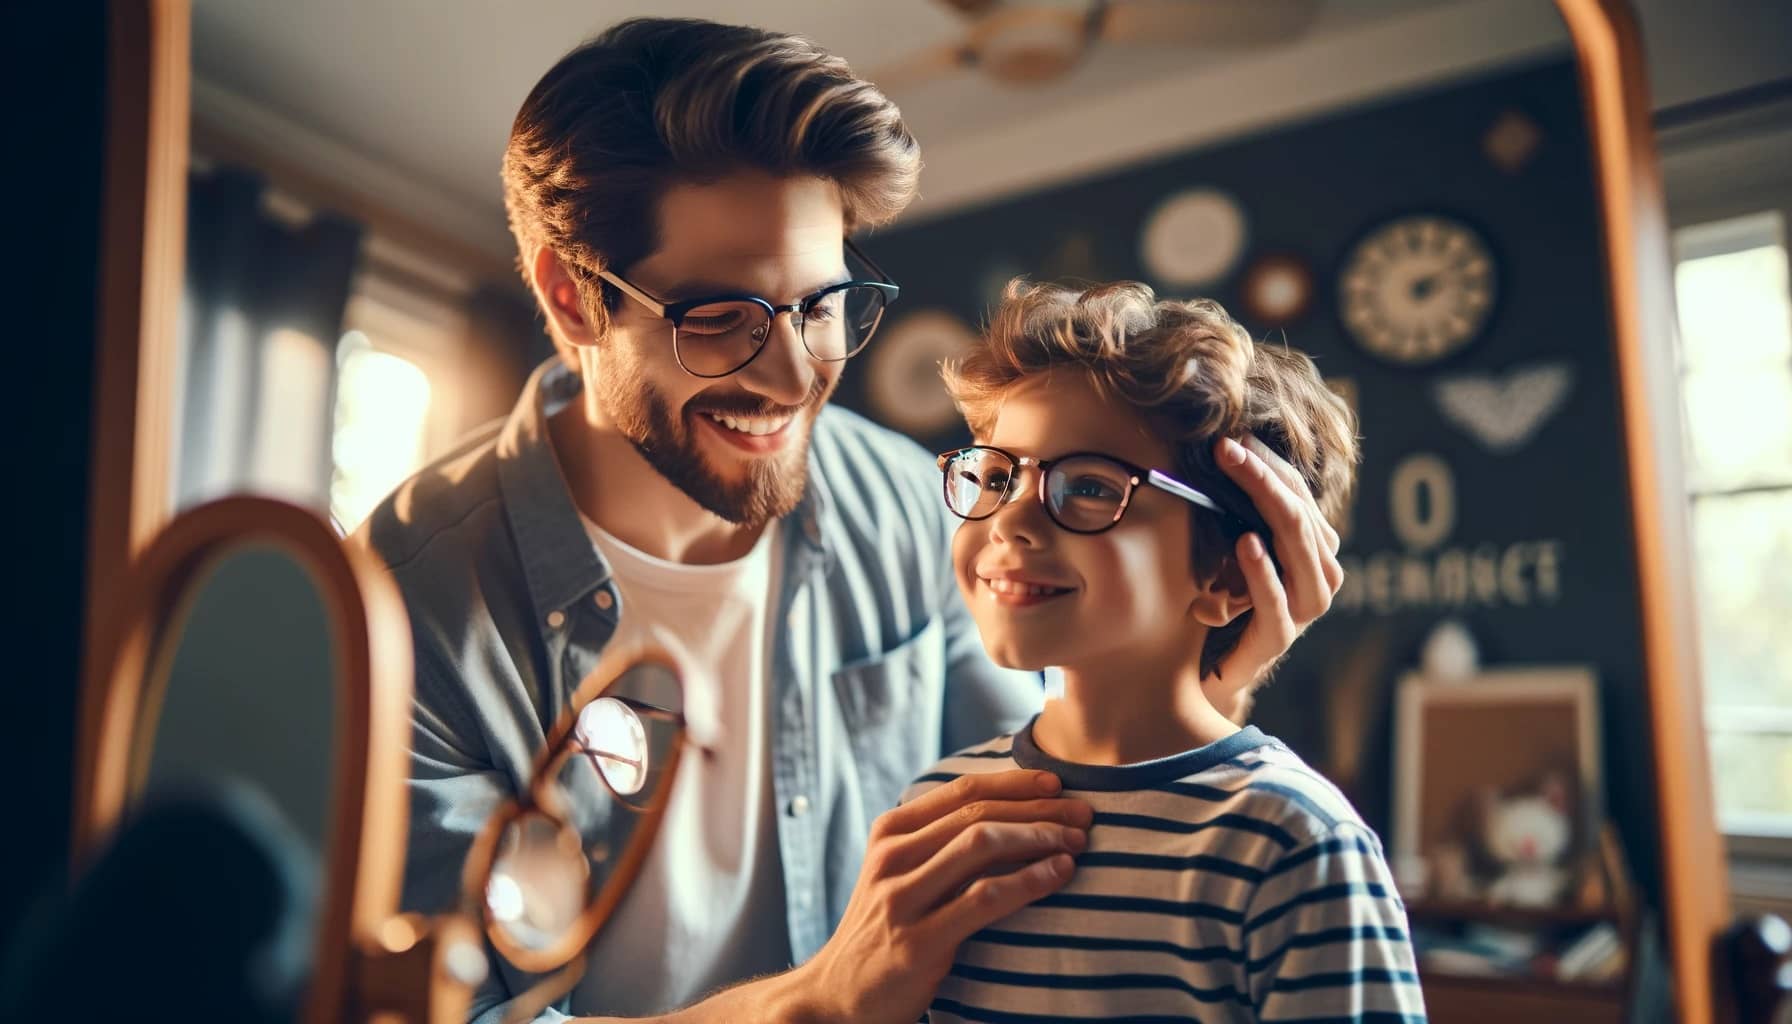 the parent helping their child adjust to new eyeglasses scene highlights the warmth, love, and support, focusing on the child's growing confidence and the importance of embracing change